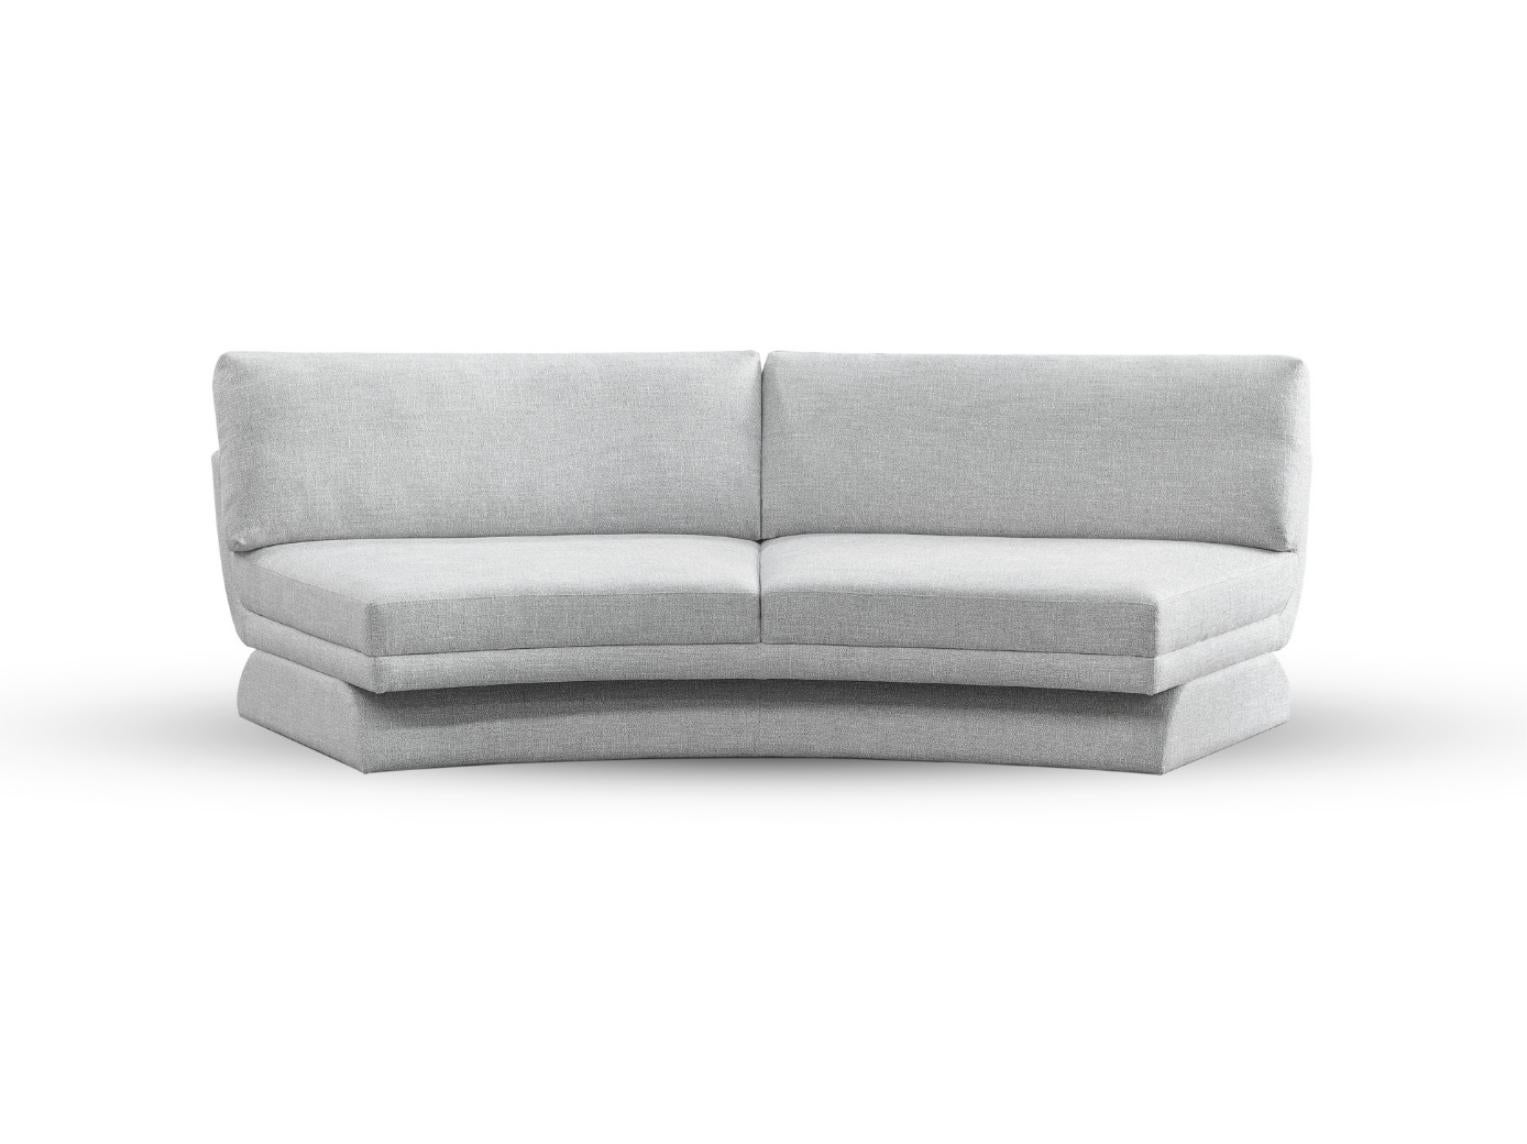 Oscar Curve Modular Sofa by DUISTT 
Dimensions: W 265 x D 125 x H 84 cm
Materials: Duistt Fabric

Inspired by the curved lines poetry of Oscar Niemeyer’s architecture, OSCAR modular sofa allures for its sensual and free-flowing curves. Like Niemeyer